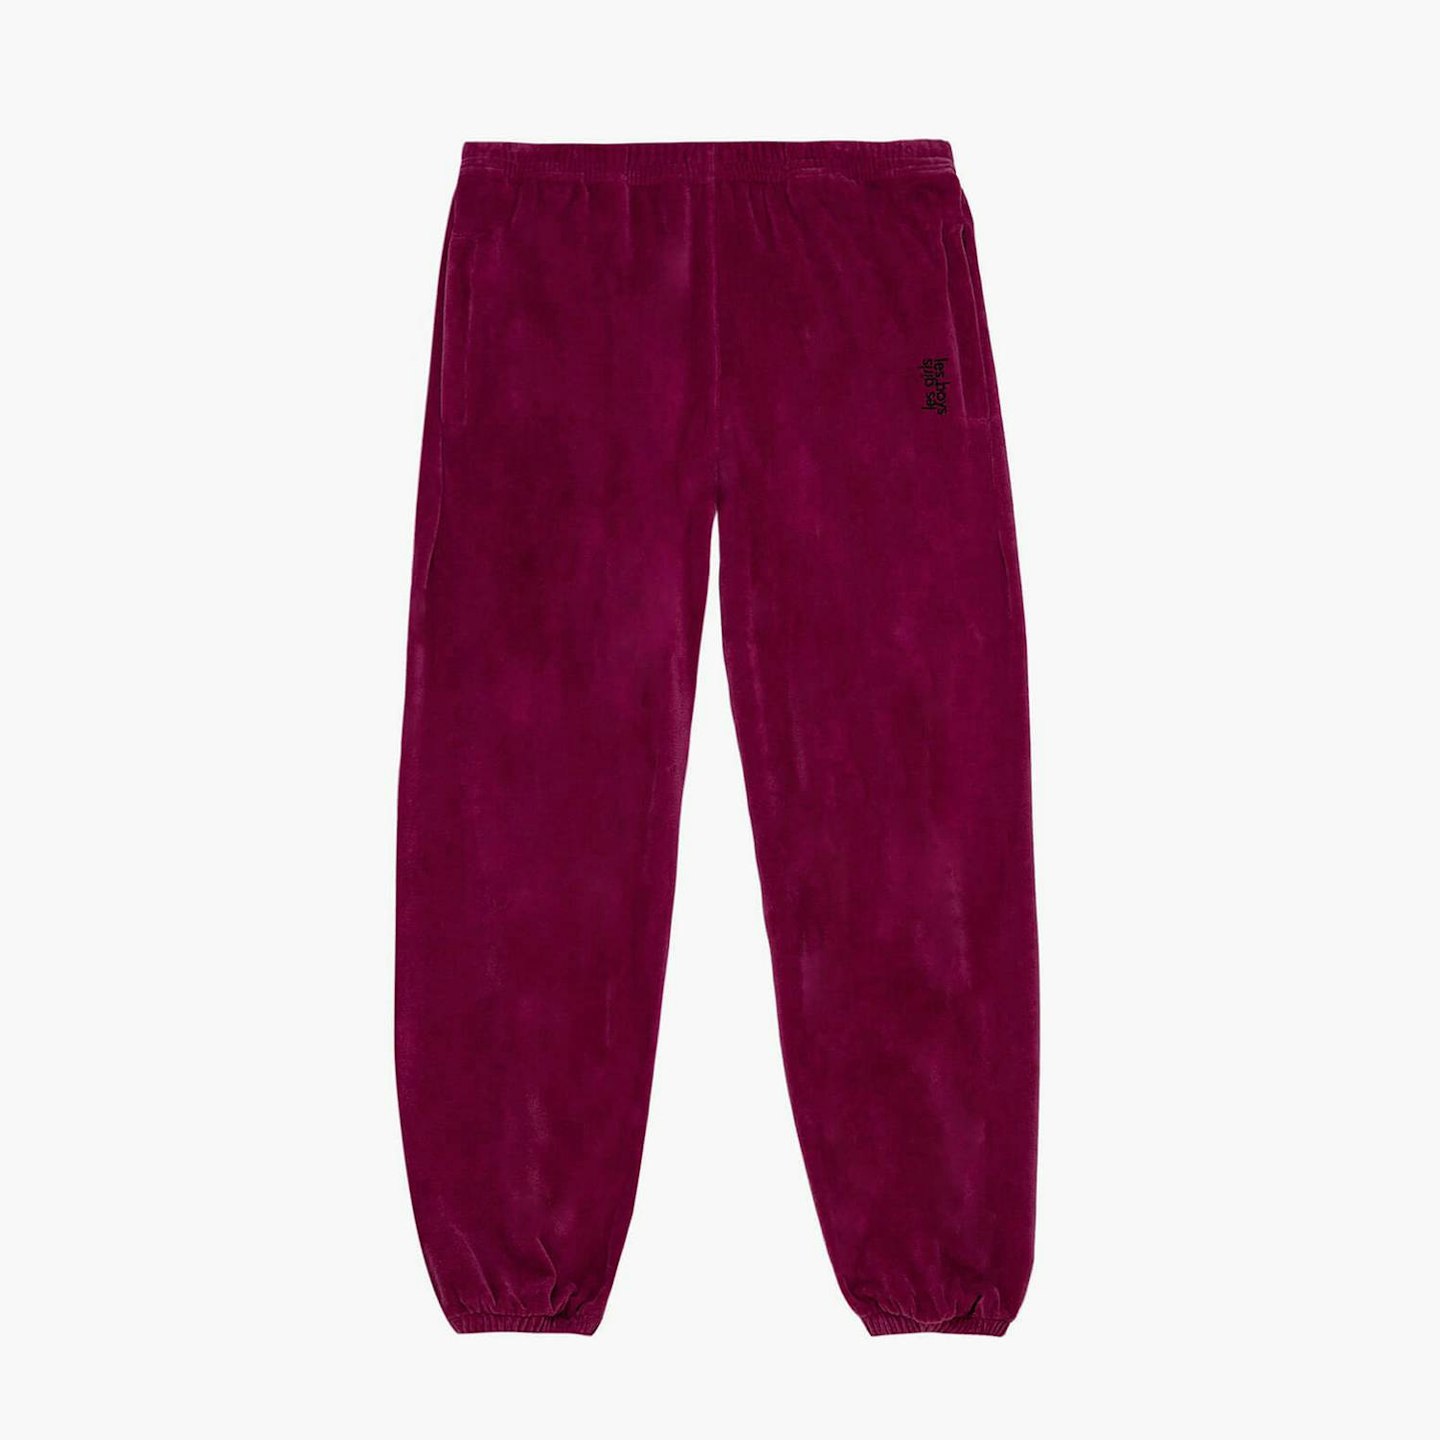 mum to be gifts Les Boys Les Girls, Velour Loose Fit Track Pants Claret £135